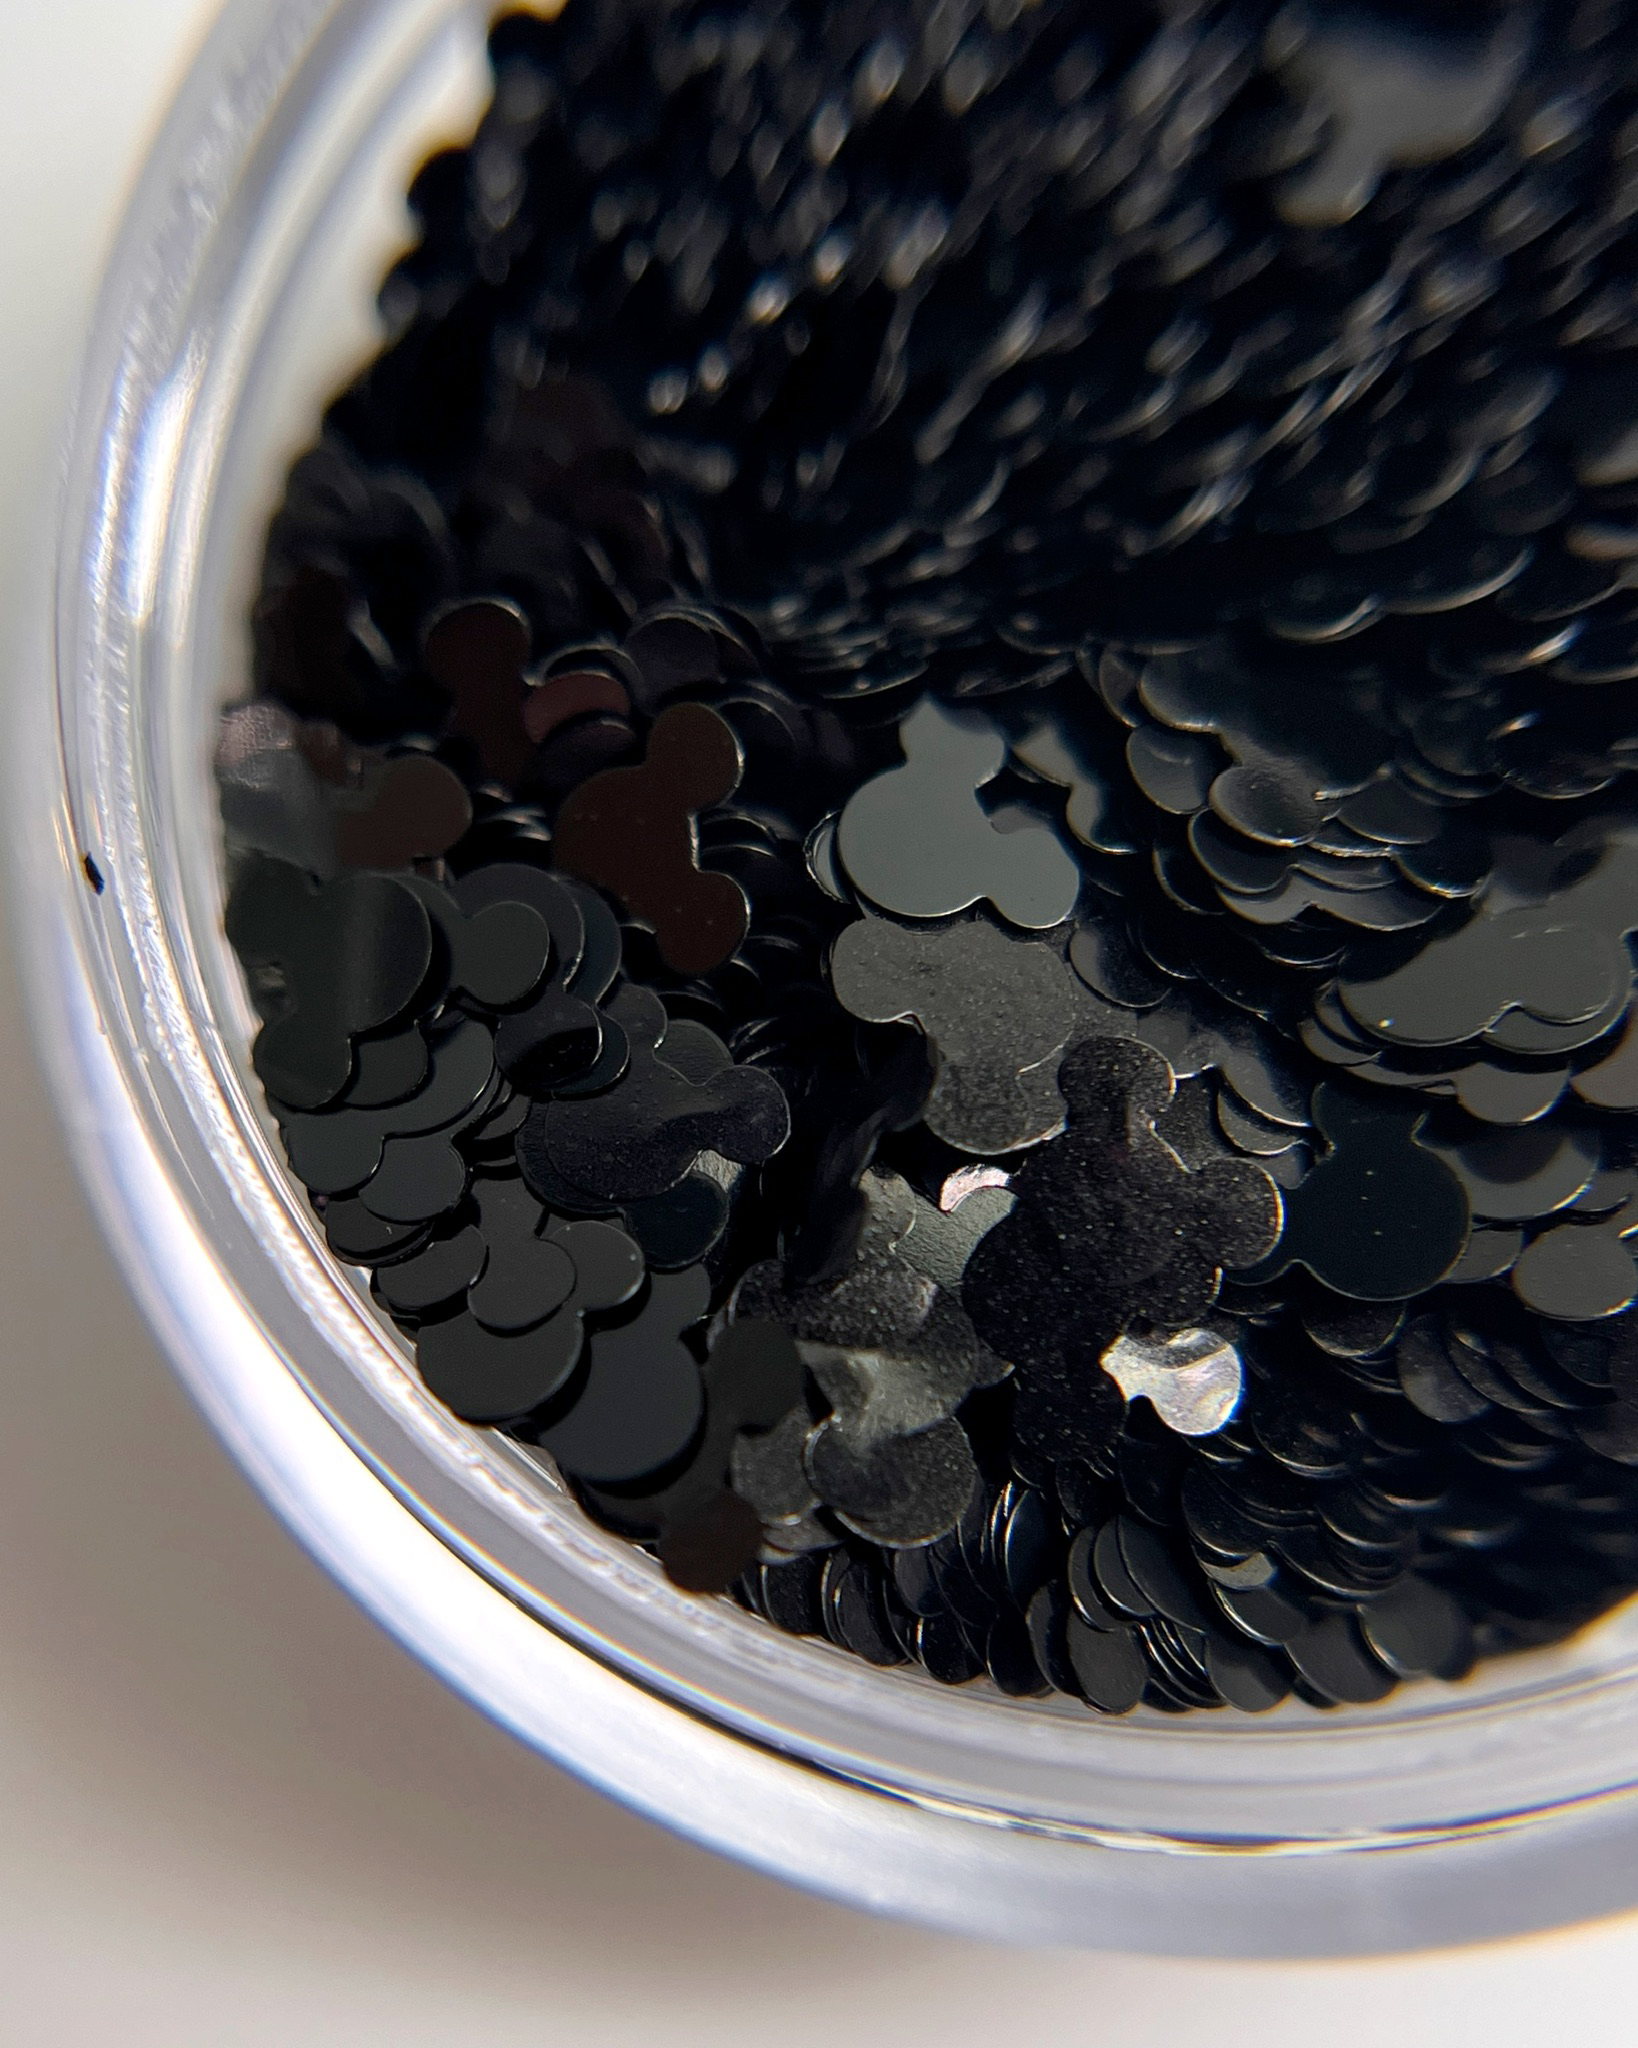 Black mouse shaped glitter in a clar jar on a whie background.